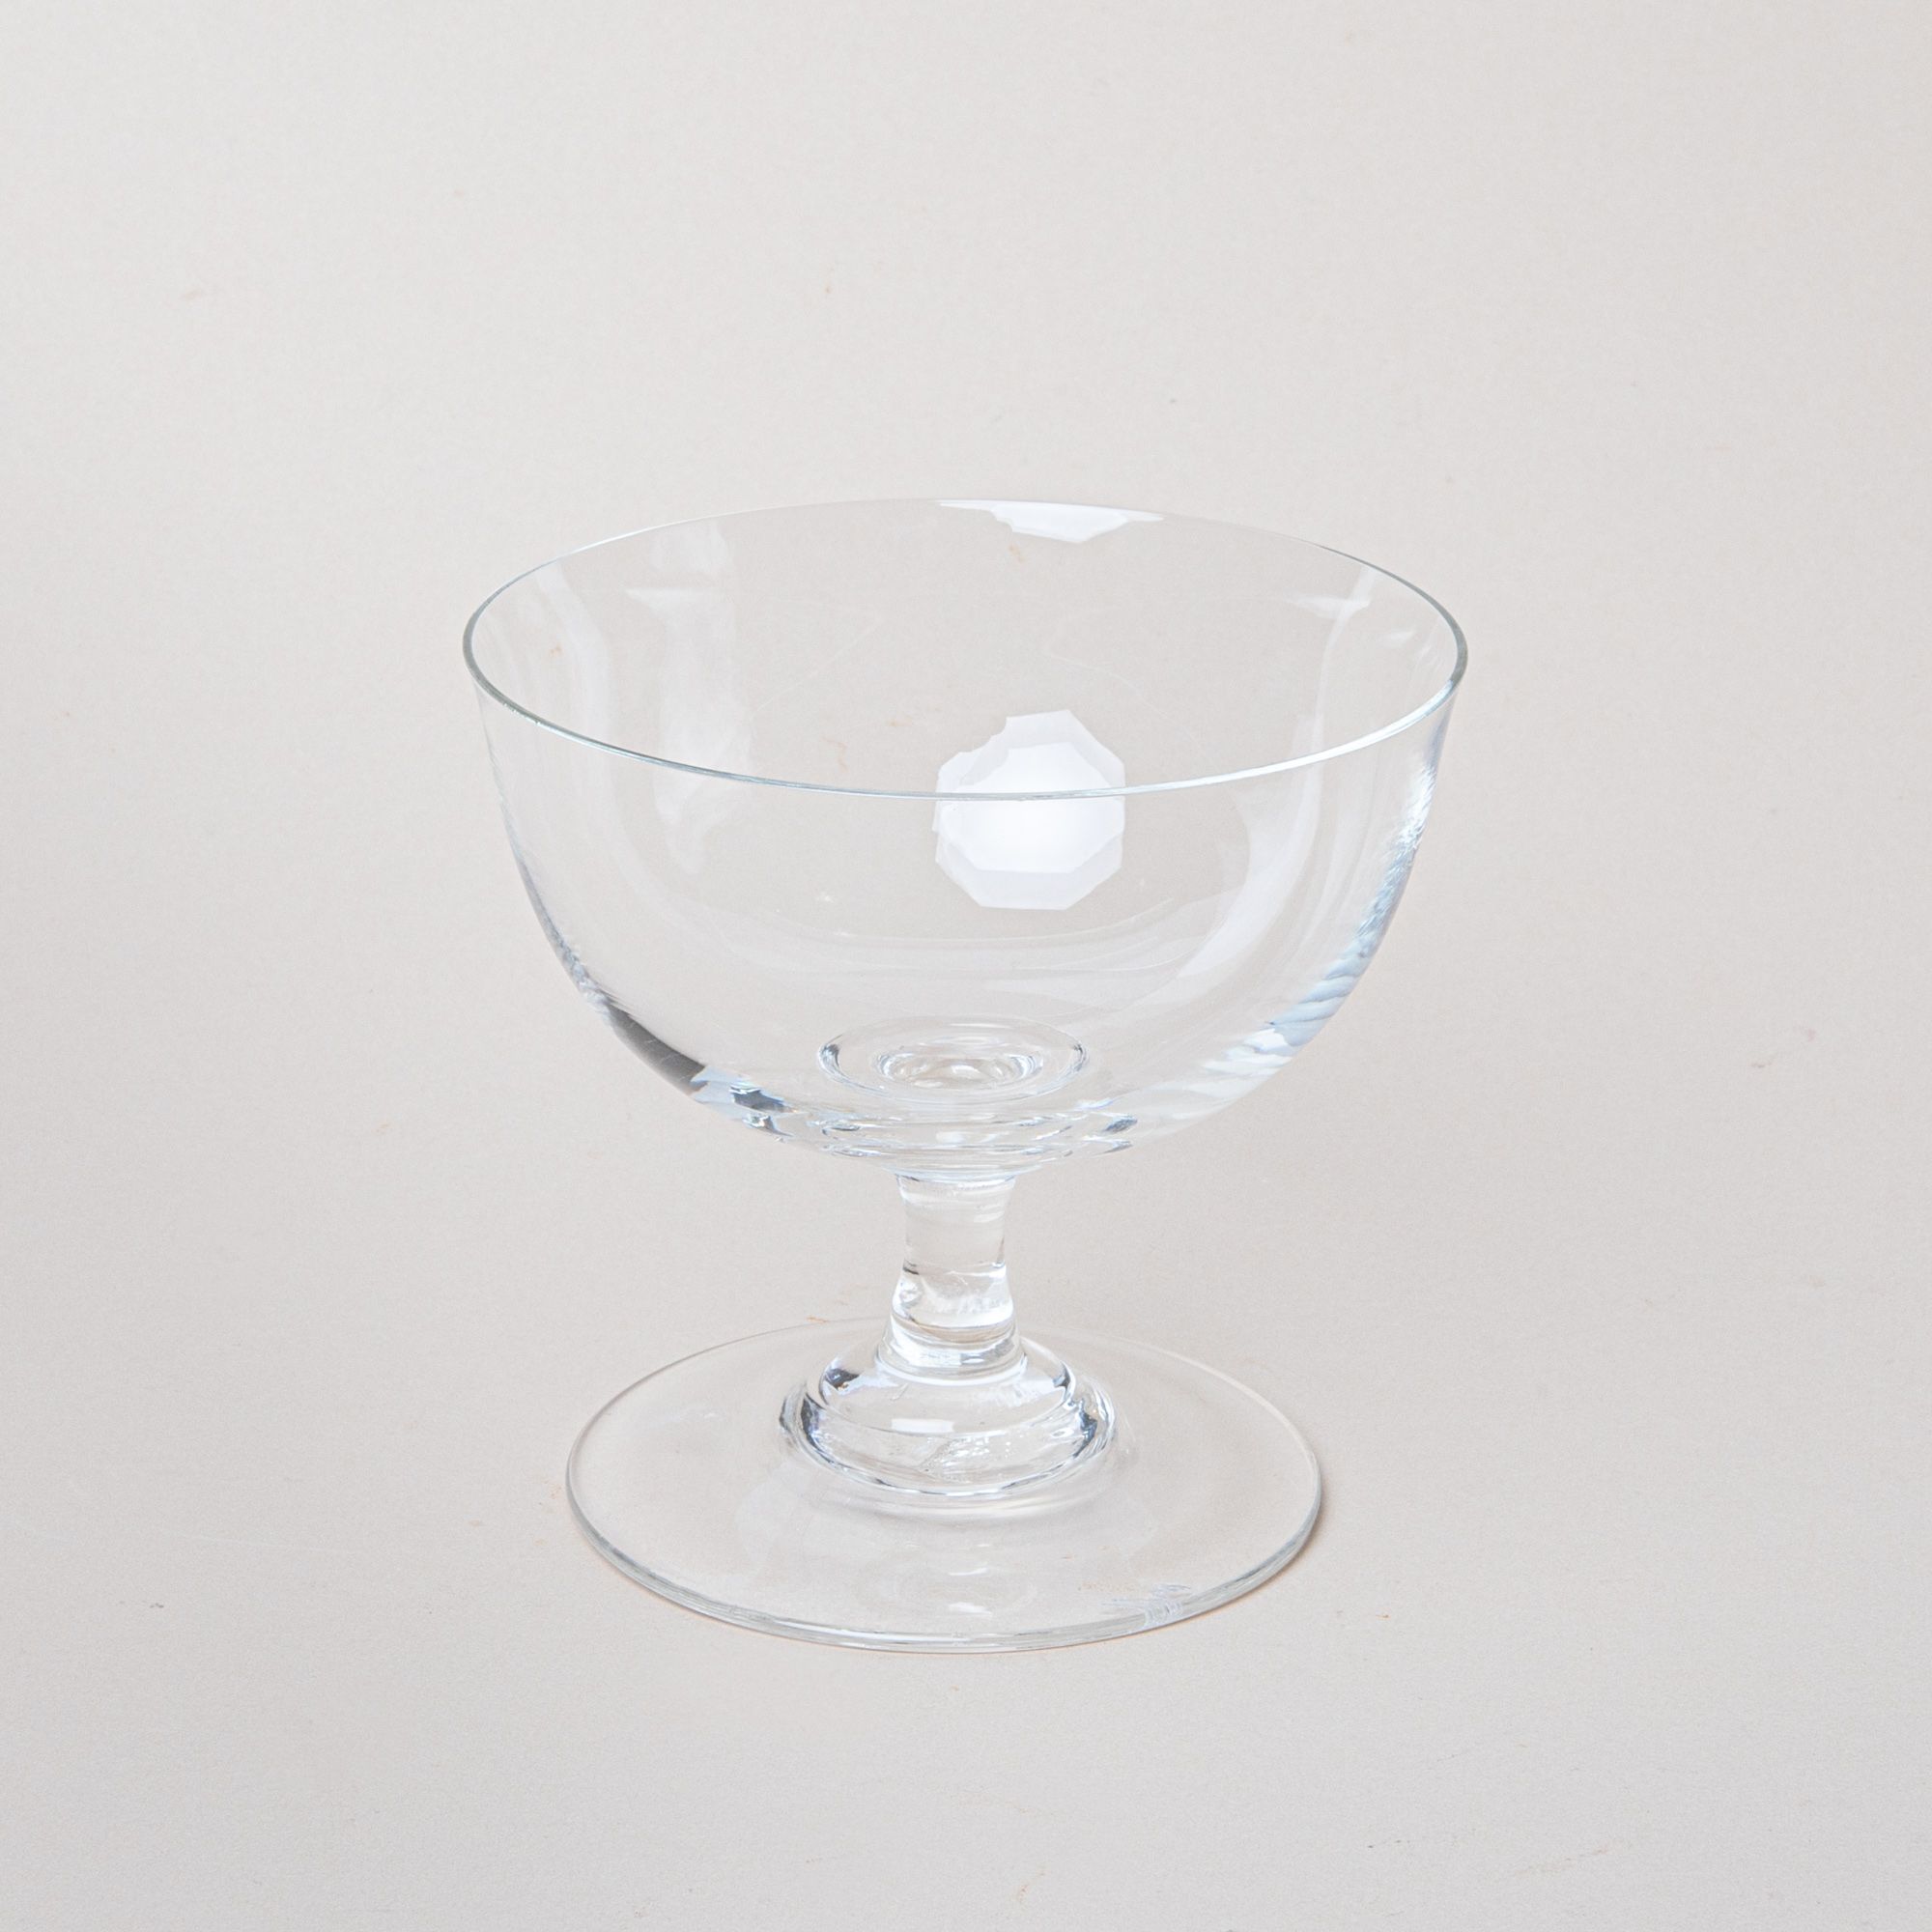 A clear coupe glass with a short stem and wide base